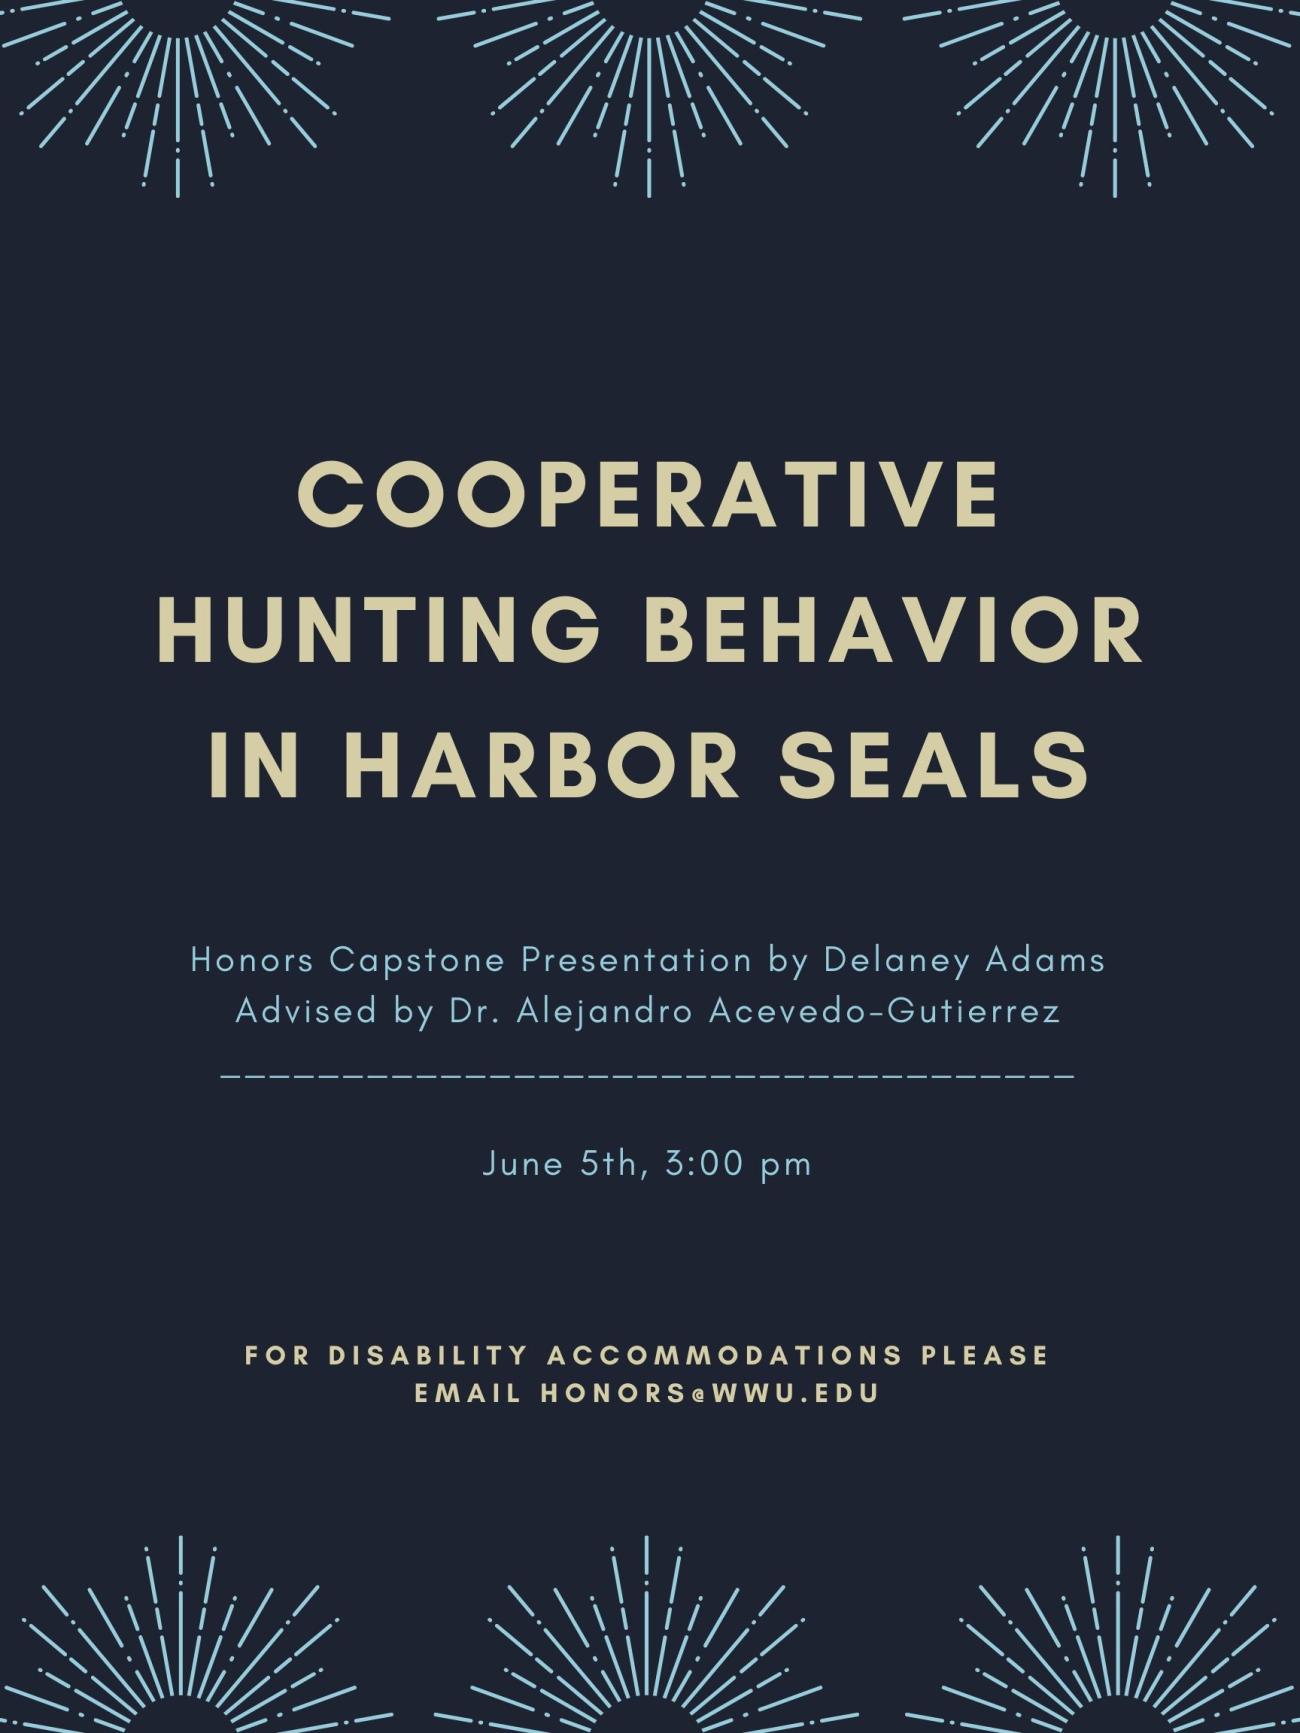 Image: simple dark blue background with sunrise illustrations at the top and bottom. Text: "Cooperative Hunting Behavior in Harbor Seals. Honors Capstone Presentation by Delaney Adams, Advisor Dr. Alejandro Acevedo-Gutierrez. June 5, 3:00 pm. For disability accommodations please email honors@wwu.edu."